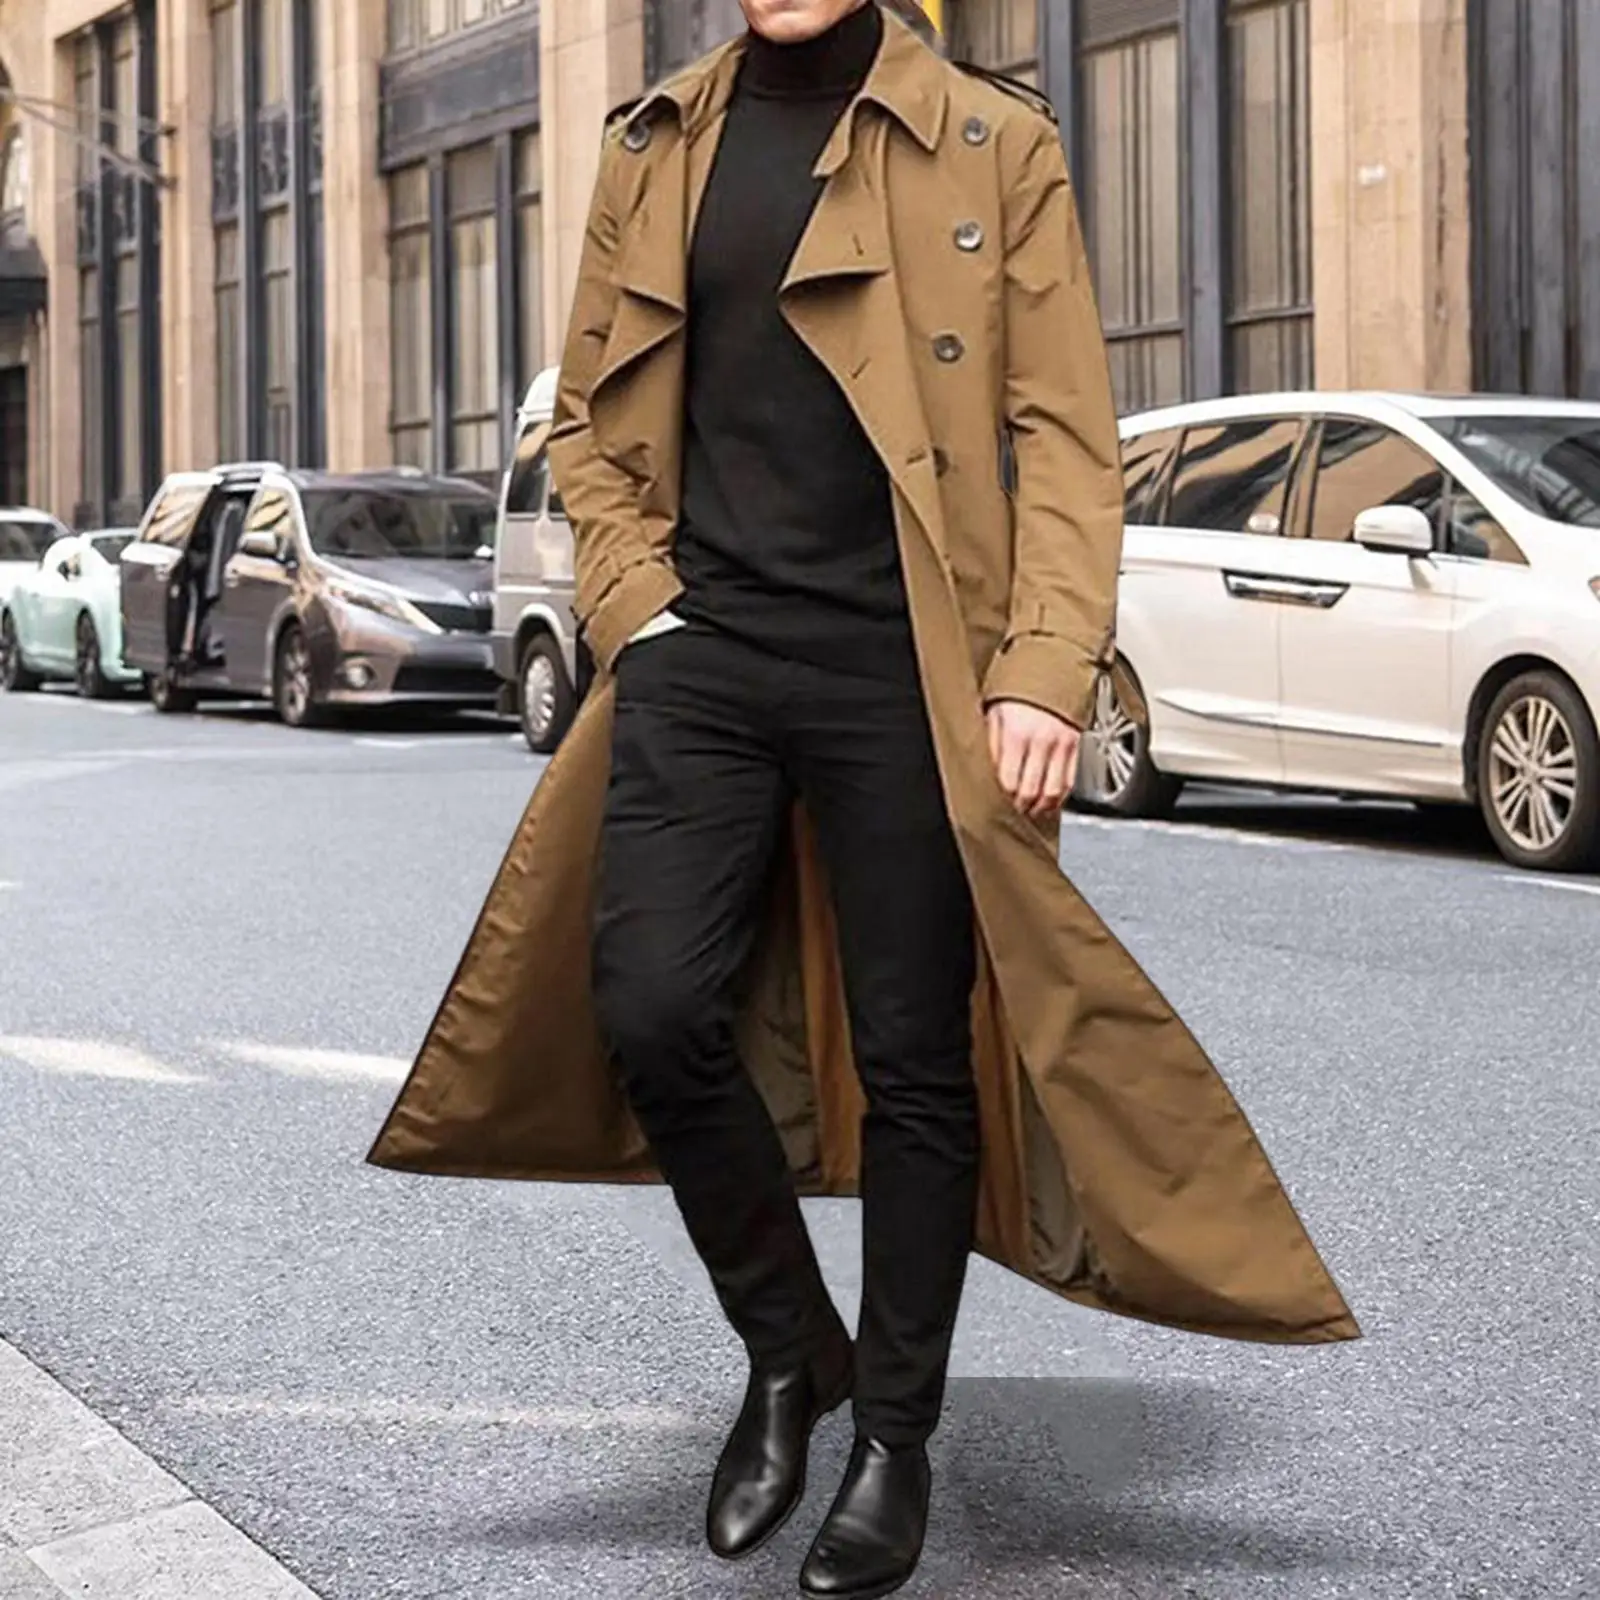 Formal Men`trench Coat Fashion full Length Overcoat Windproof Windbreaker for Daily Wear Spring Autumn Business